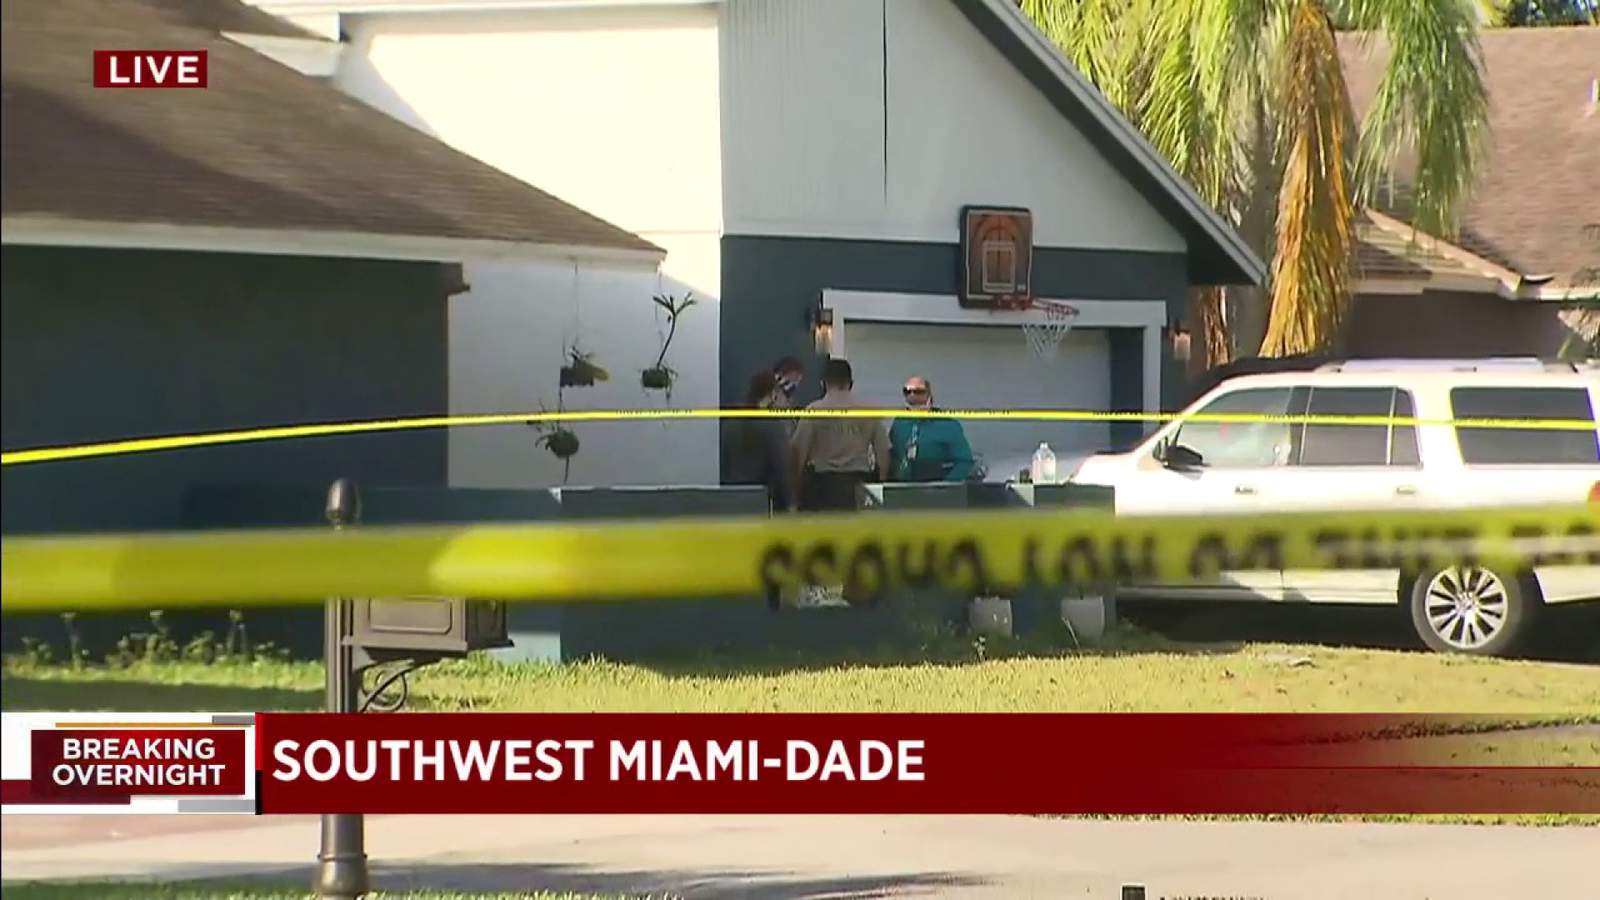 Police are looking for a gunman after a man in his Miami-Dade home is shot